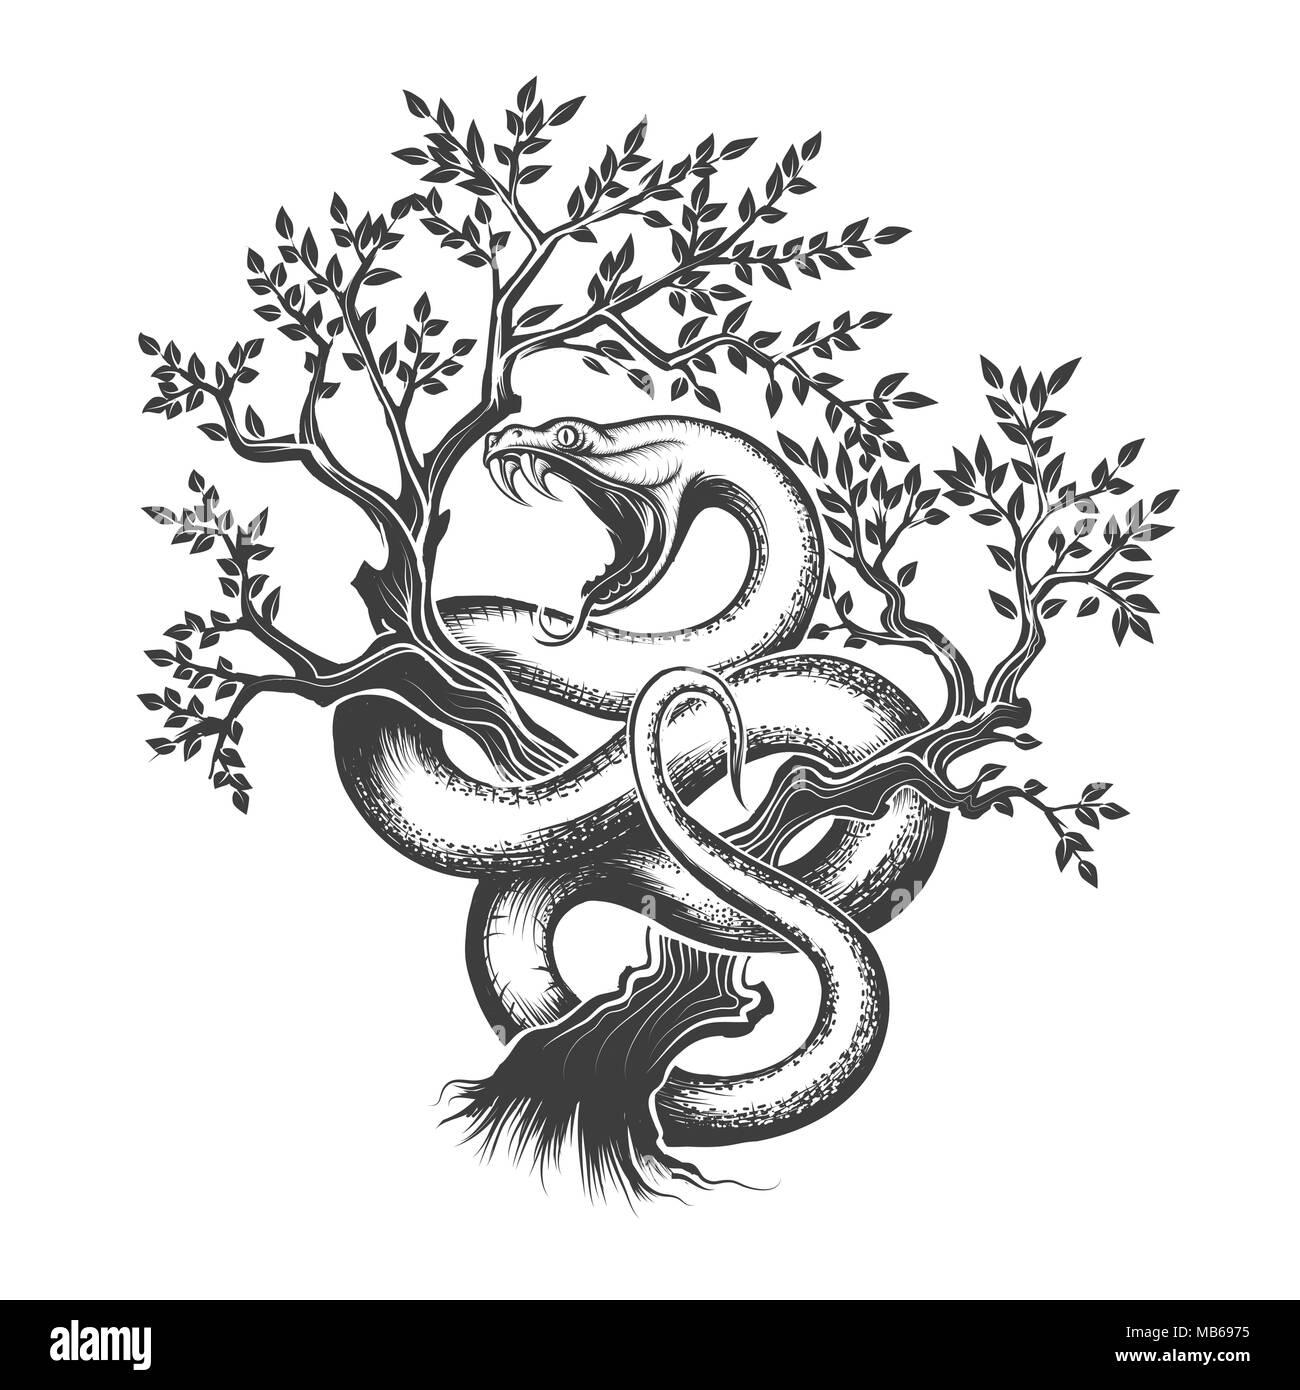 Snake with open mouth crawling up inside a tree drawn in engraving style. Vector illustration. Stock Vector